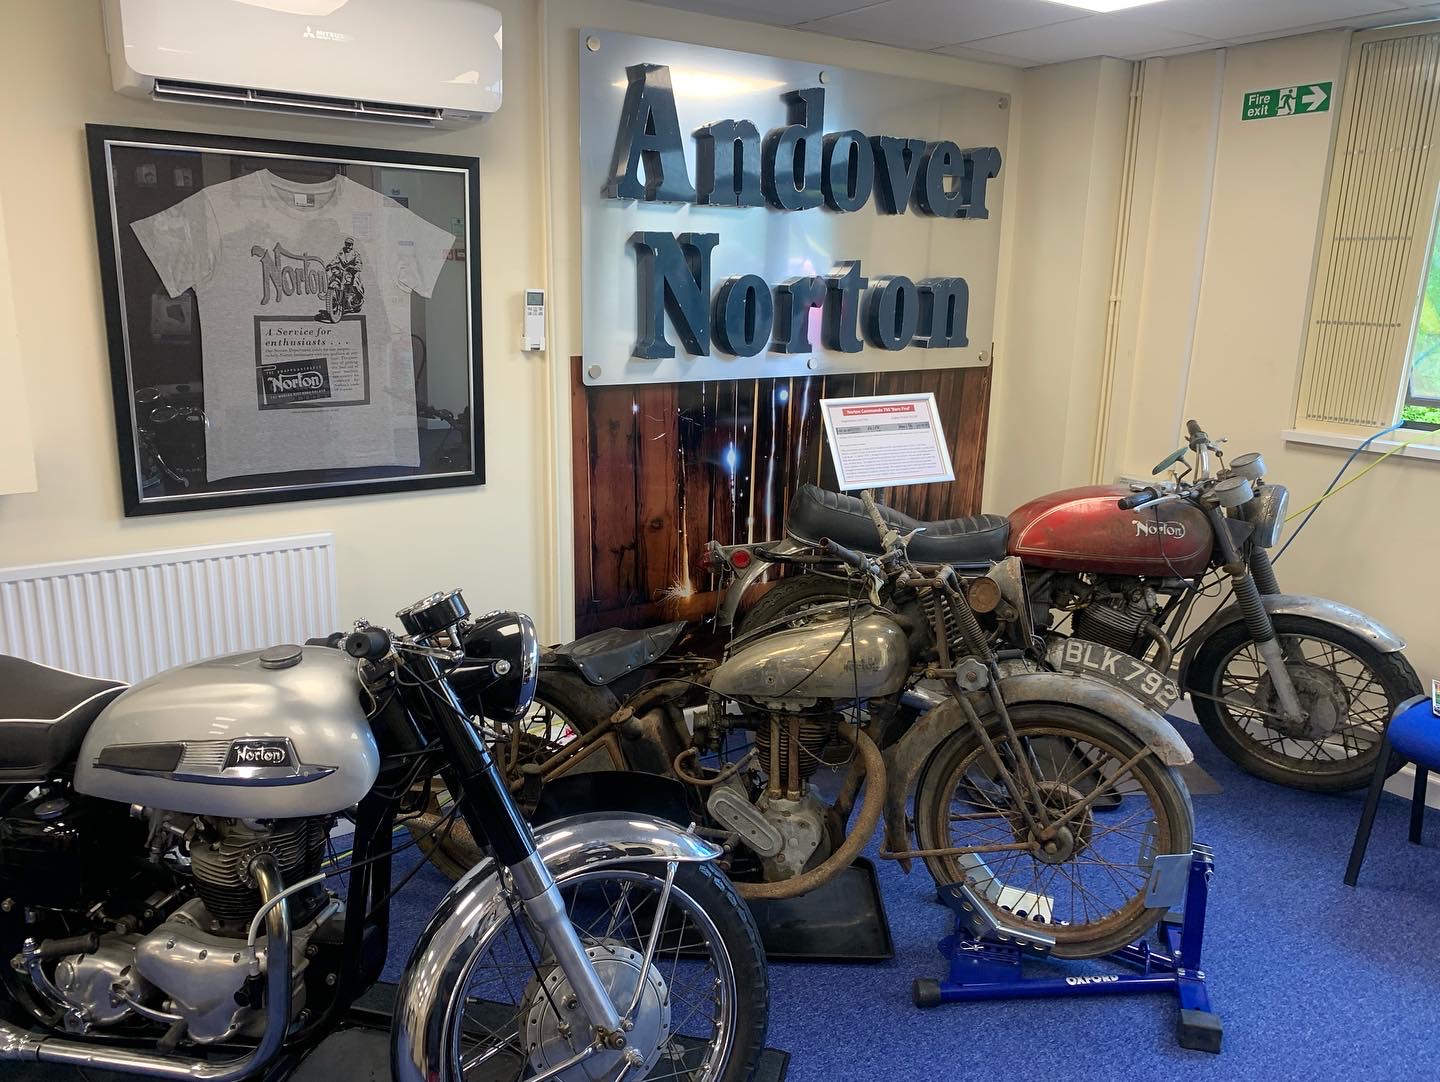 Andover Norton open day Sat 21st May